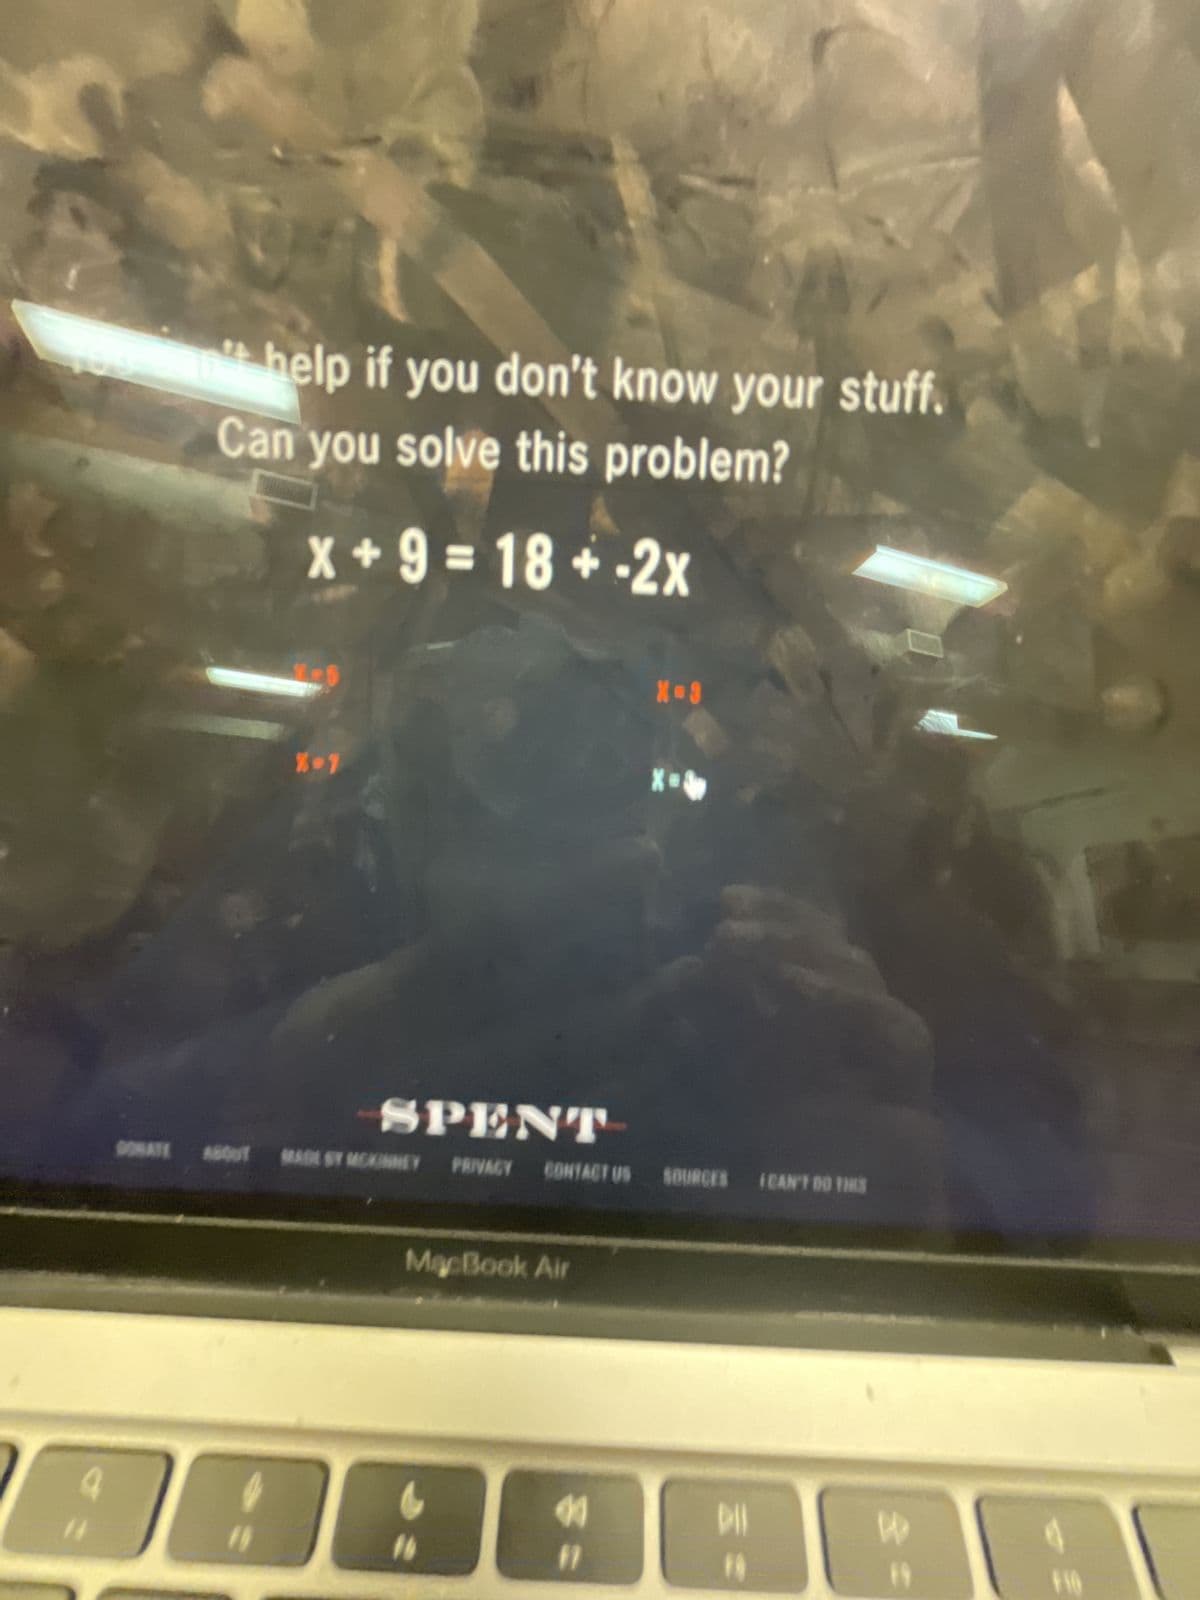 14
help if you don't know your stuff.
Can you solve this problem?
x+9=18+-2x
X-7
X-8
SPENT
PRIVACY CONTACT US SOURCES (CAN'T DO THES
DONATE ABOUT MADE ST MCKINNEY
MacBook Air
"
"
IO
2
"